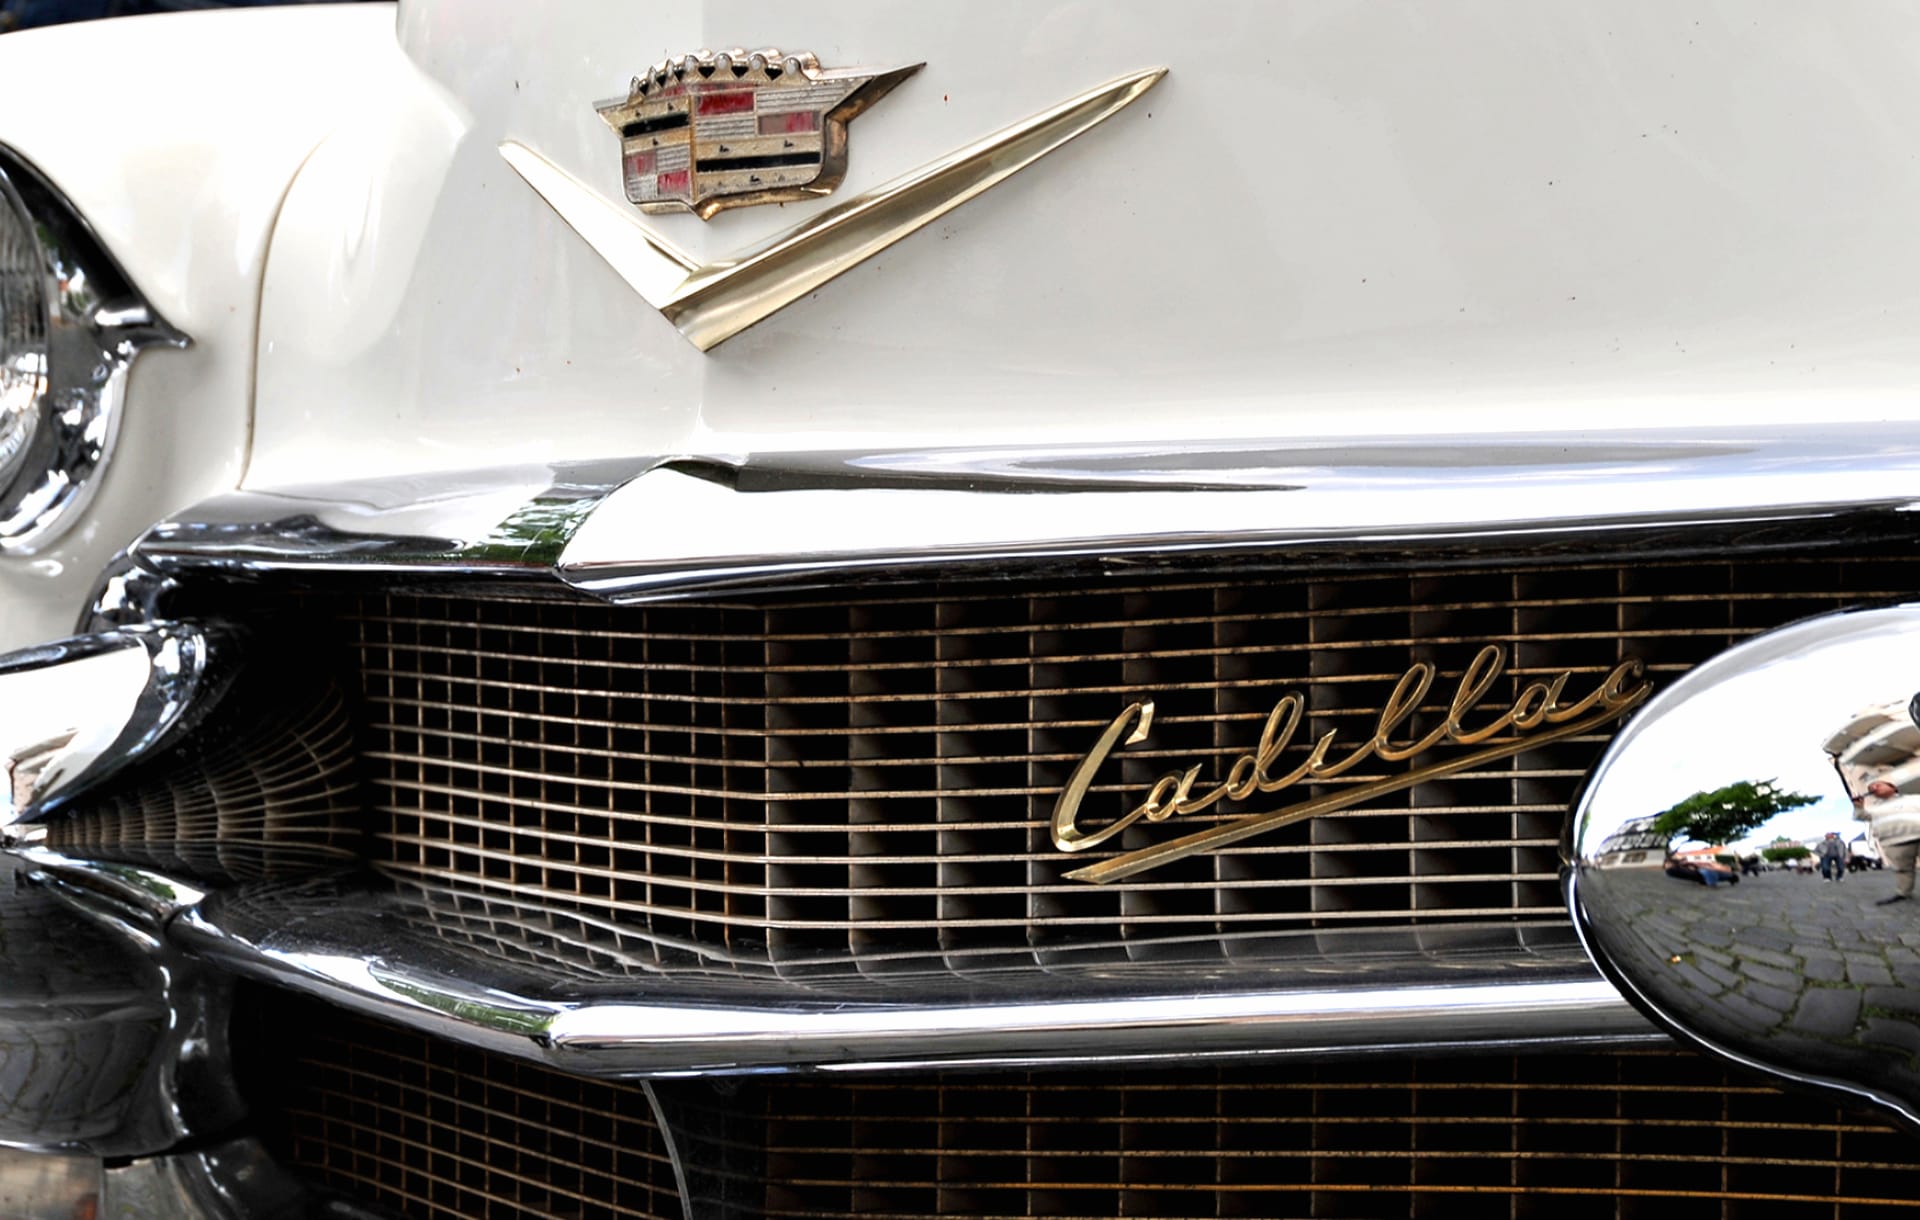 1956 Cadillac Series 62 Coupe de Ville wallpapers HD quality